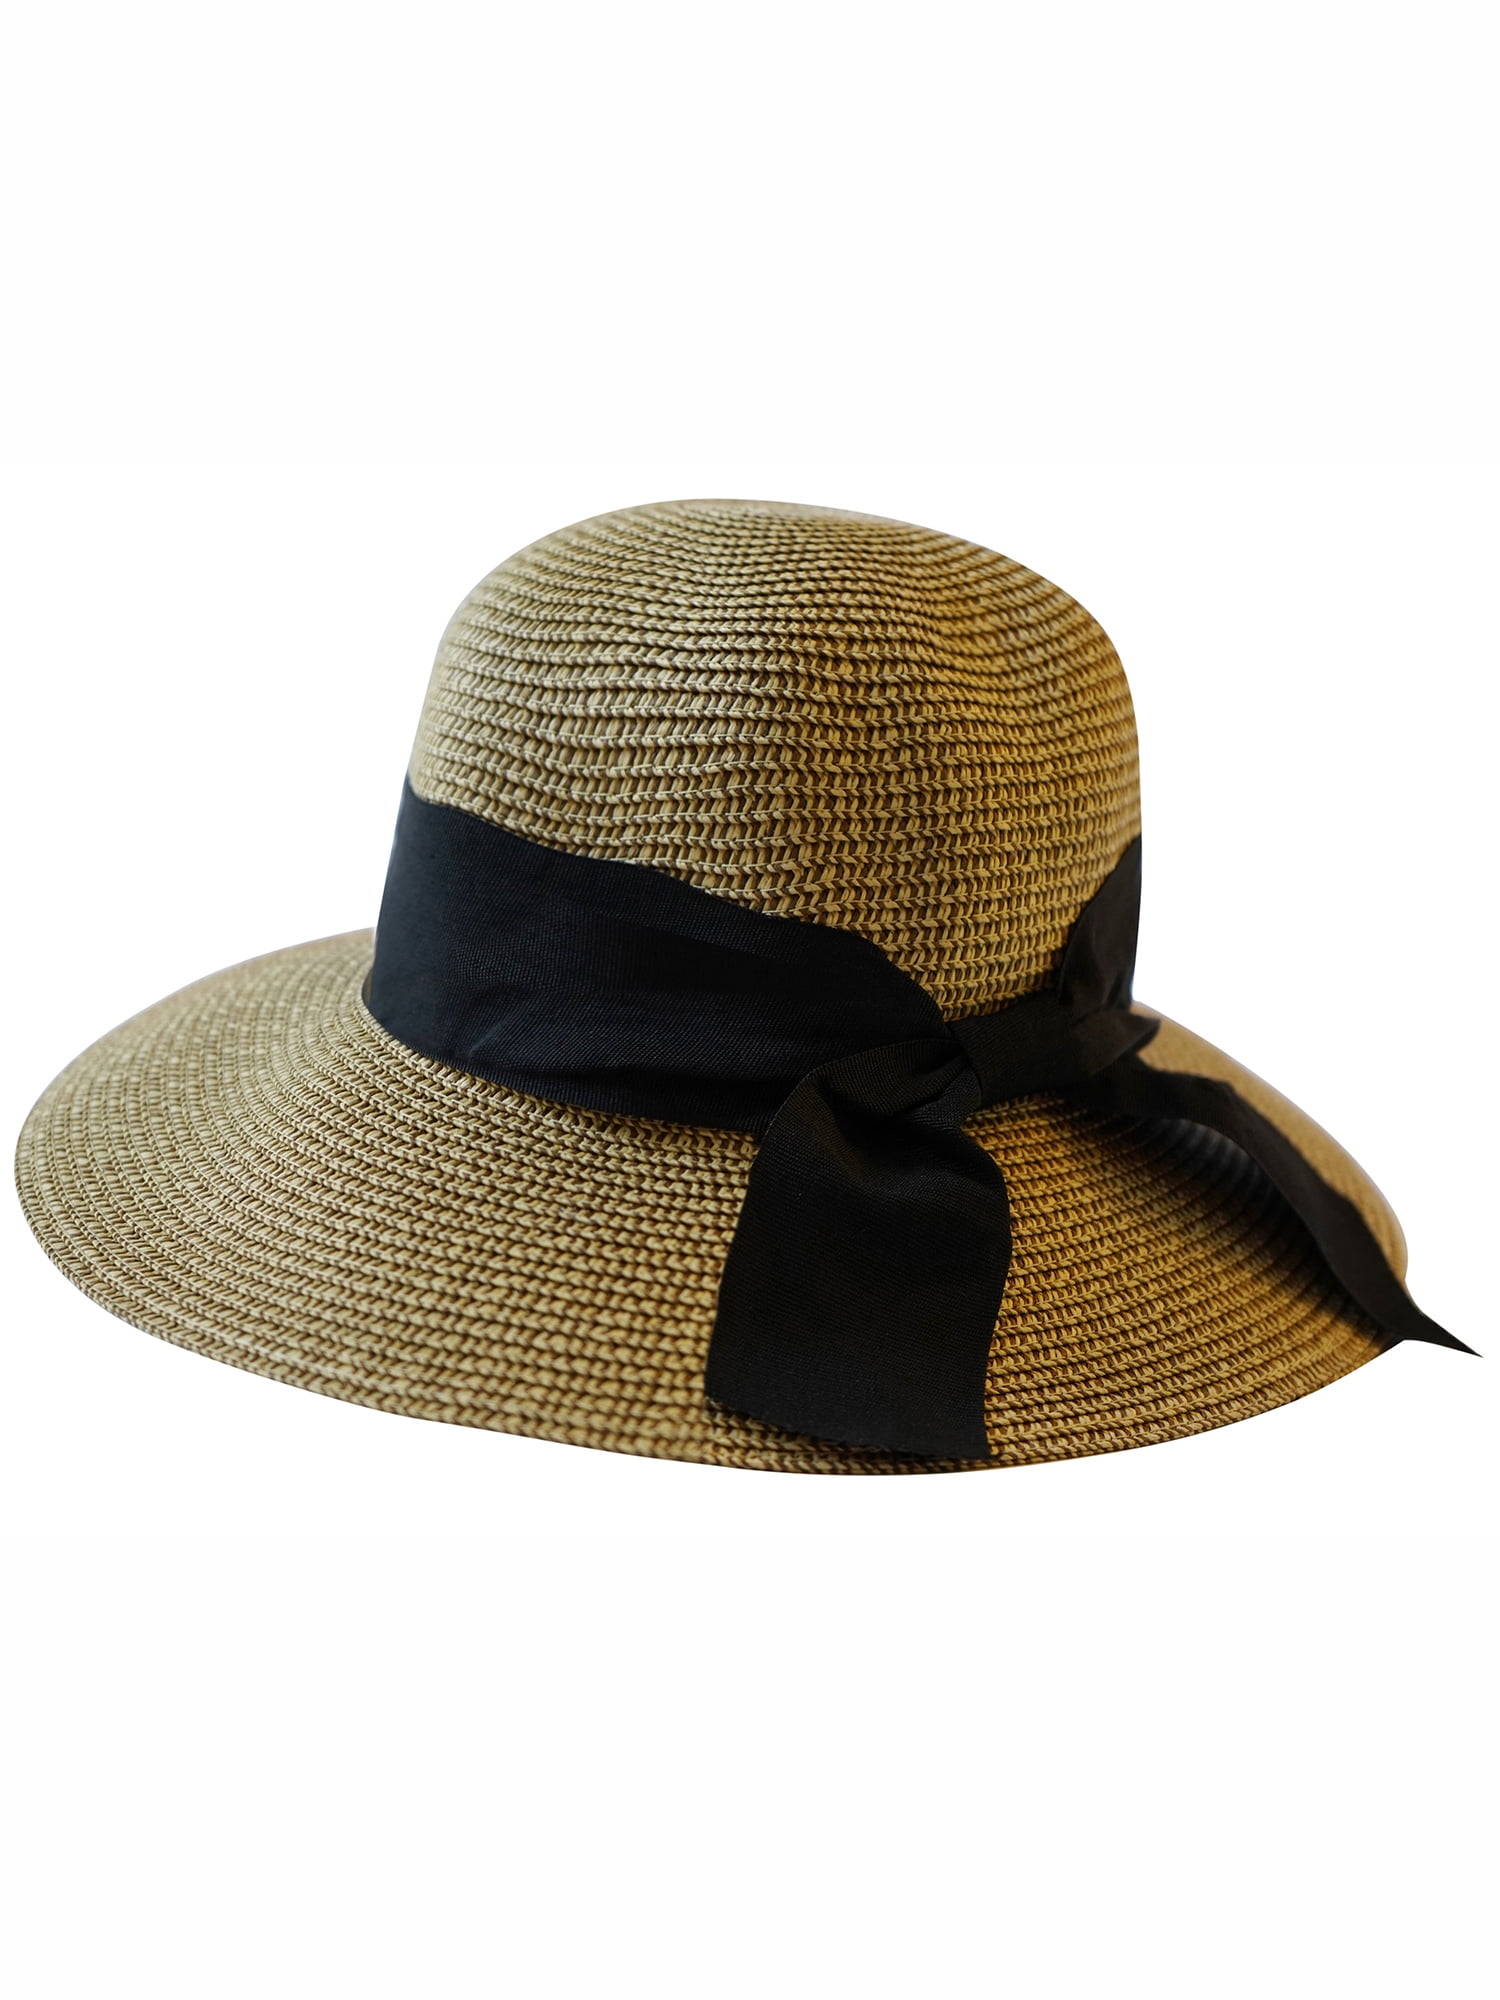 Straw Hat For Women Packable Summer Hats For Women Floppy Hat Ponytail Sun  Protection Hat Rolled Straw Hat,Natural 